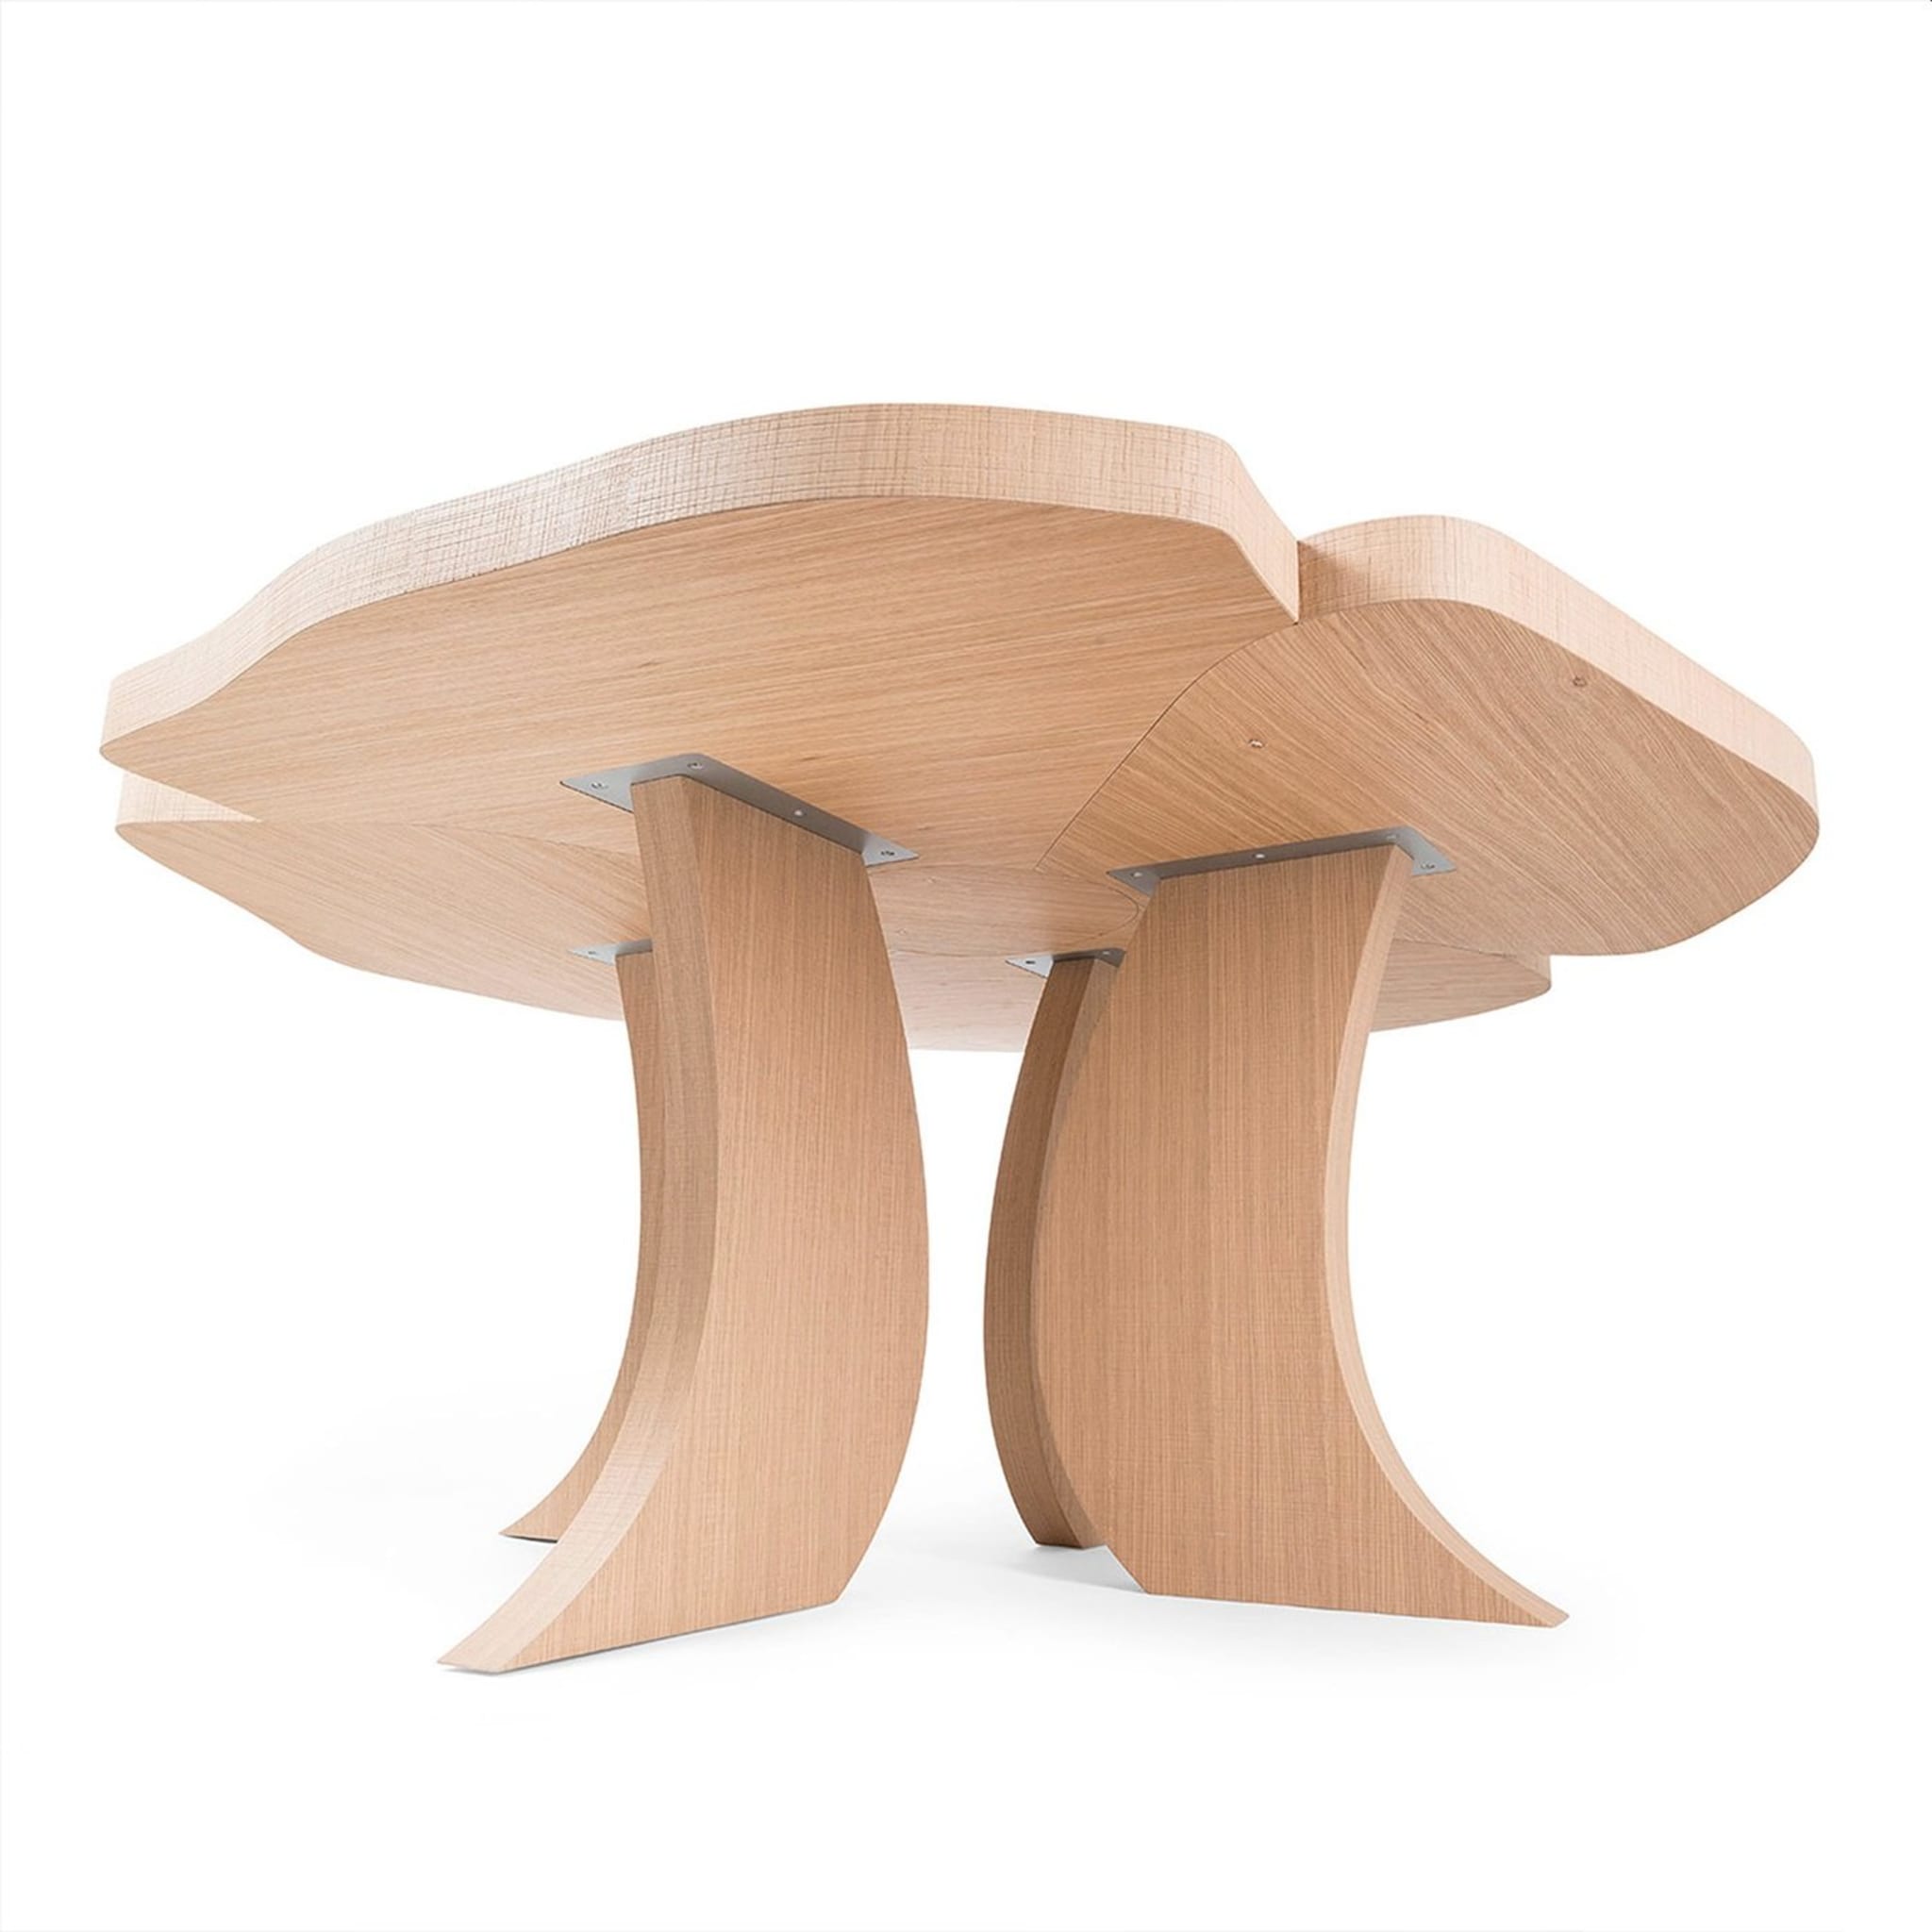 Andy Natural Dining Table - Alternative view 1